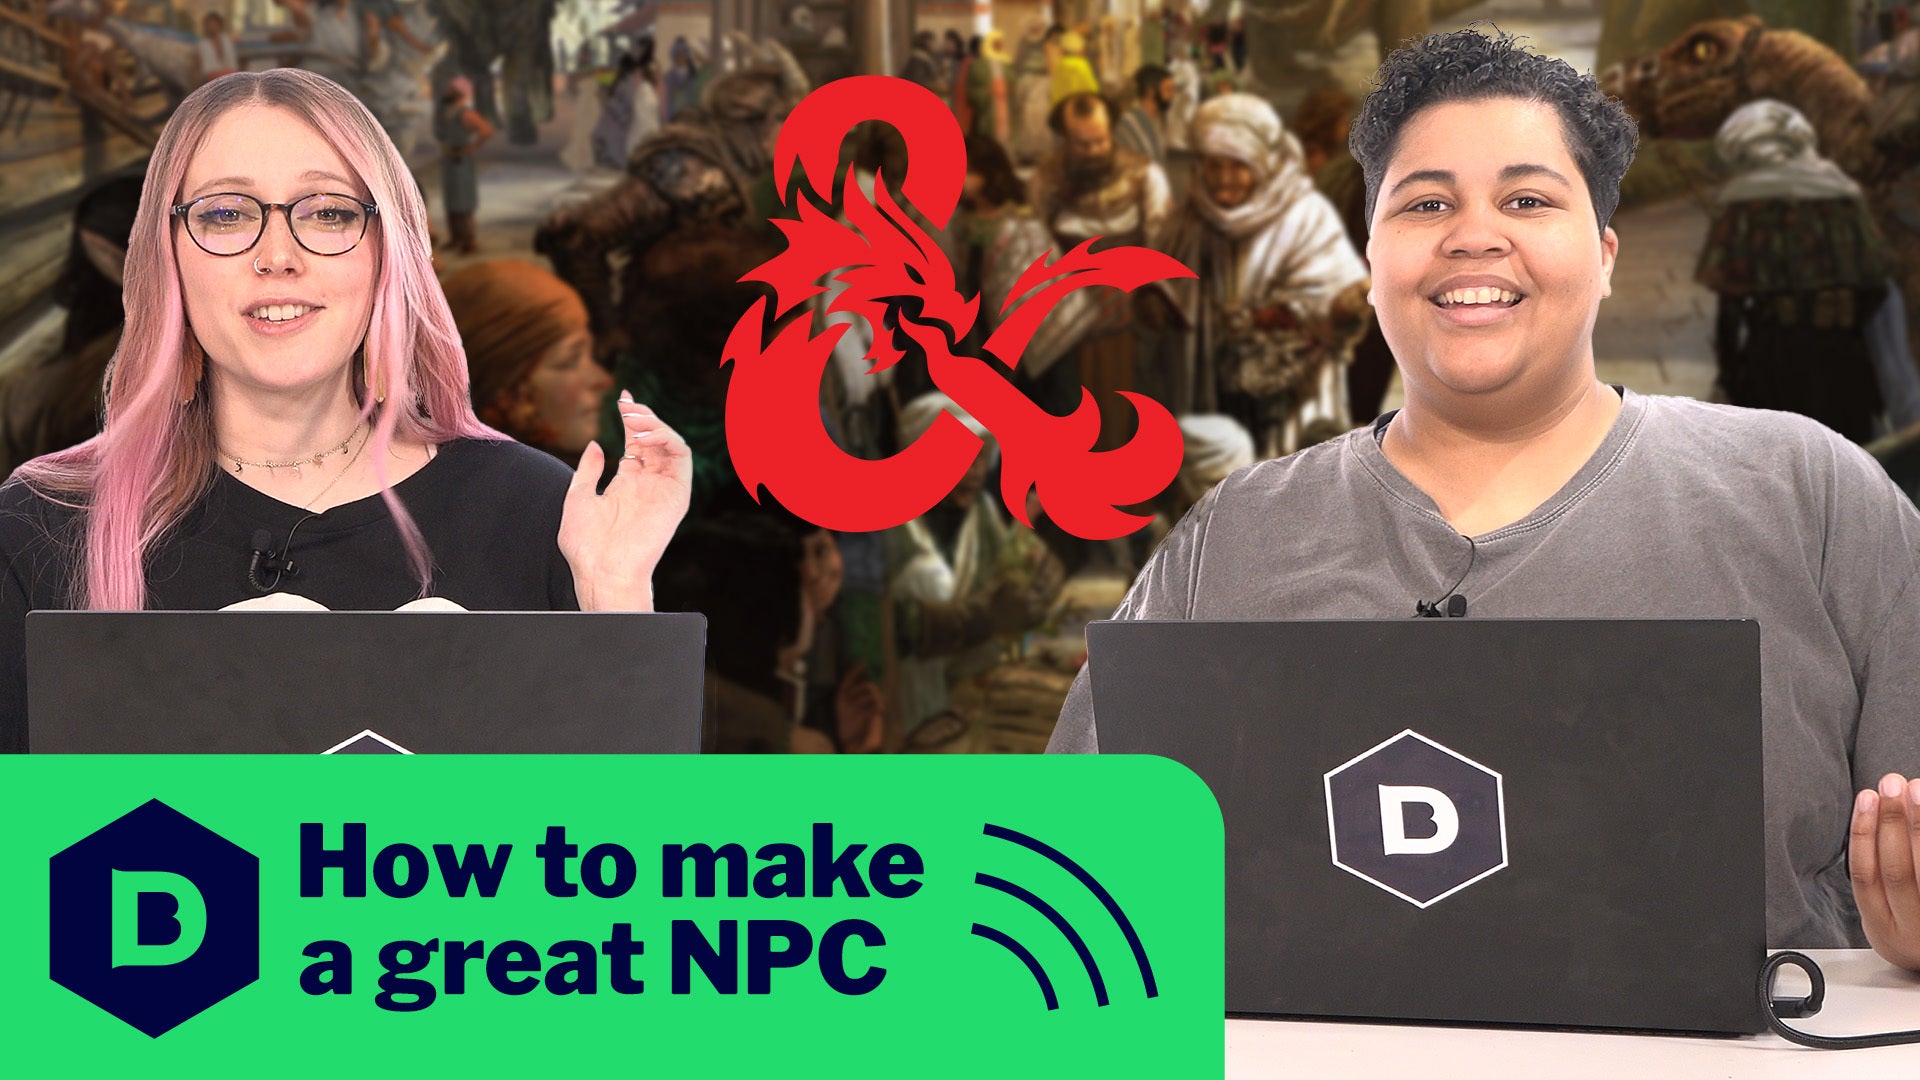 Image for Make amazing NPCs even under pressure with these top tips